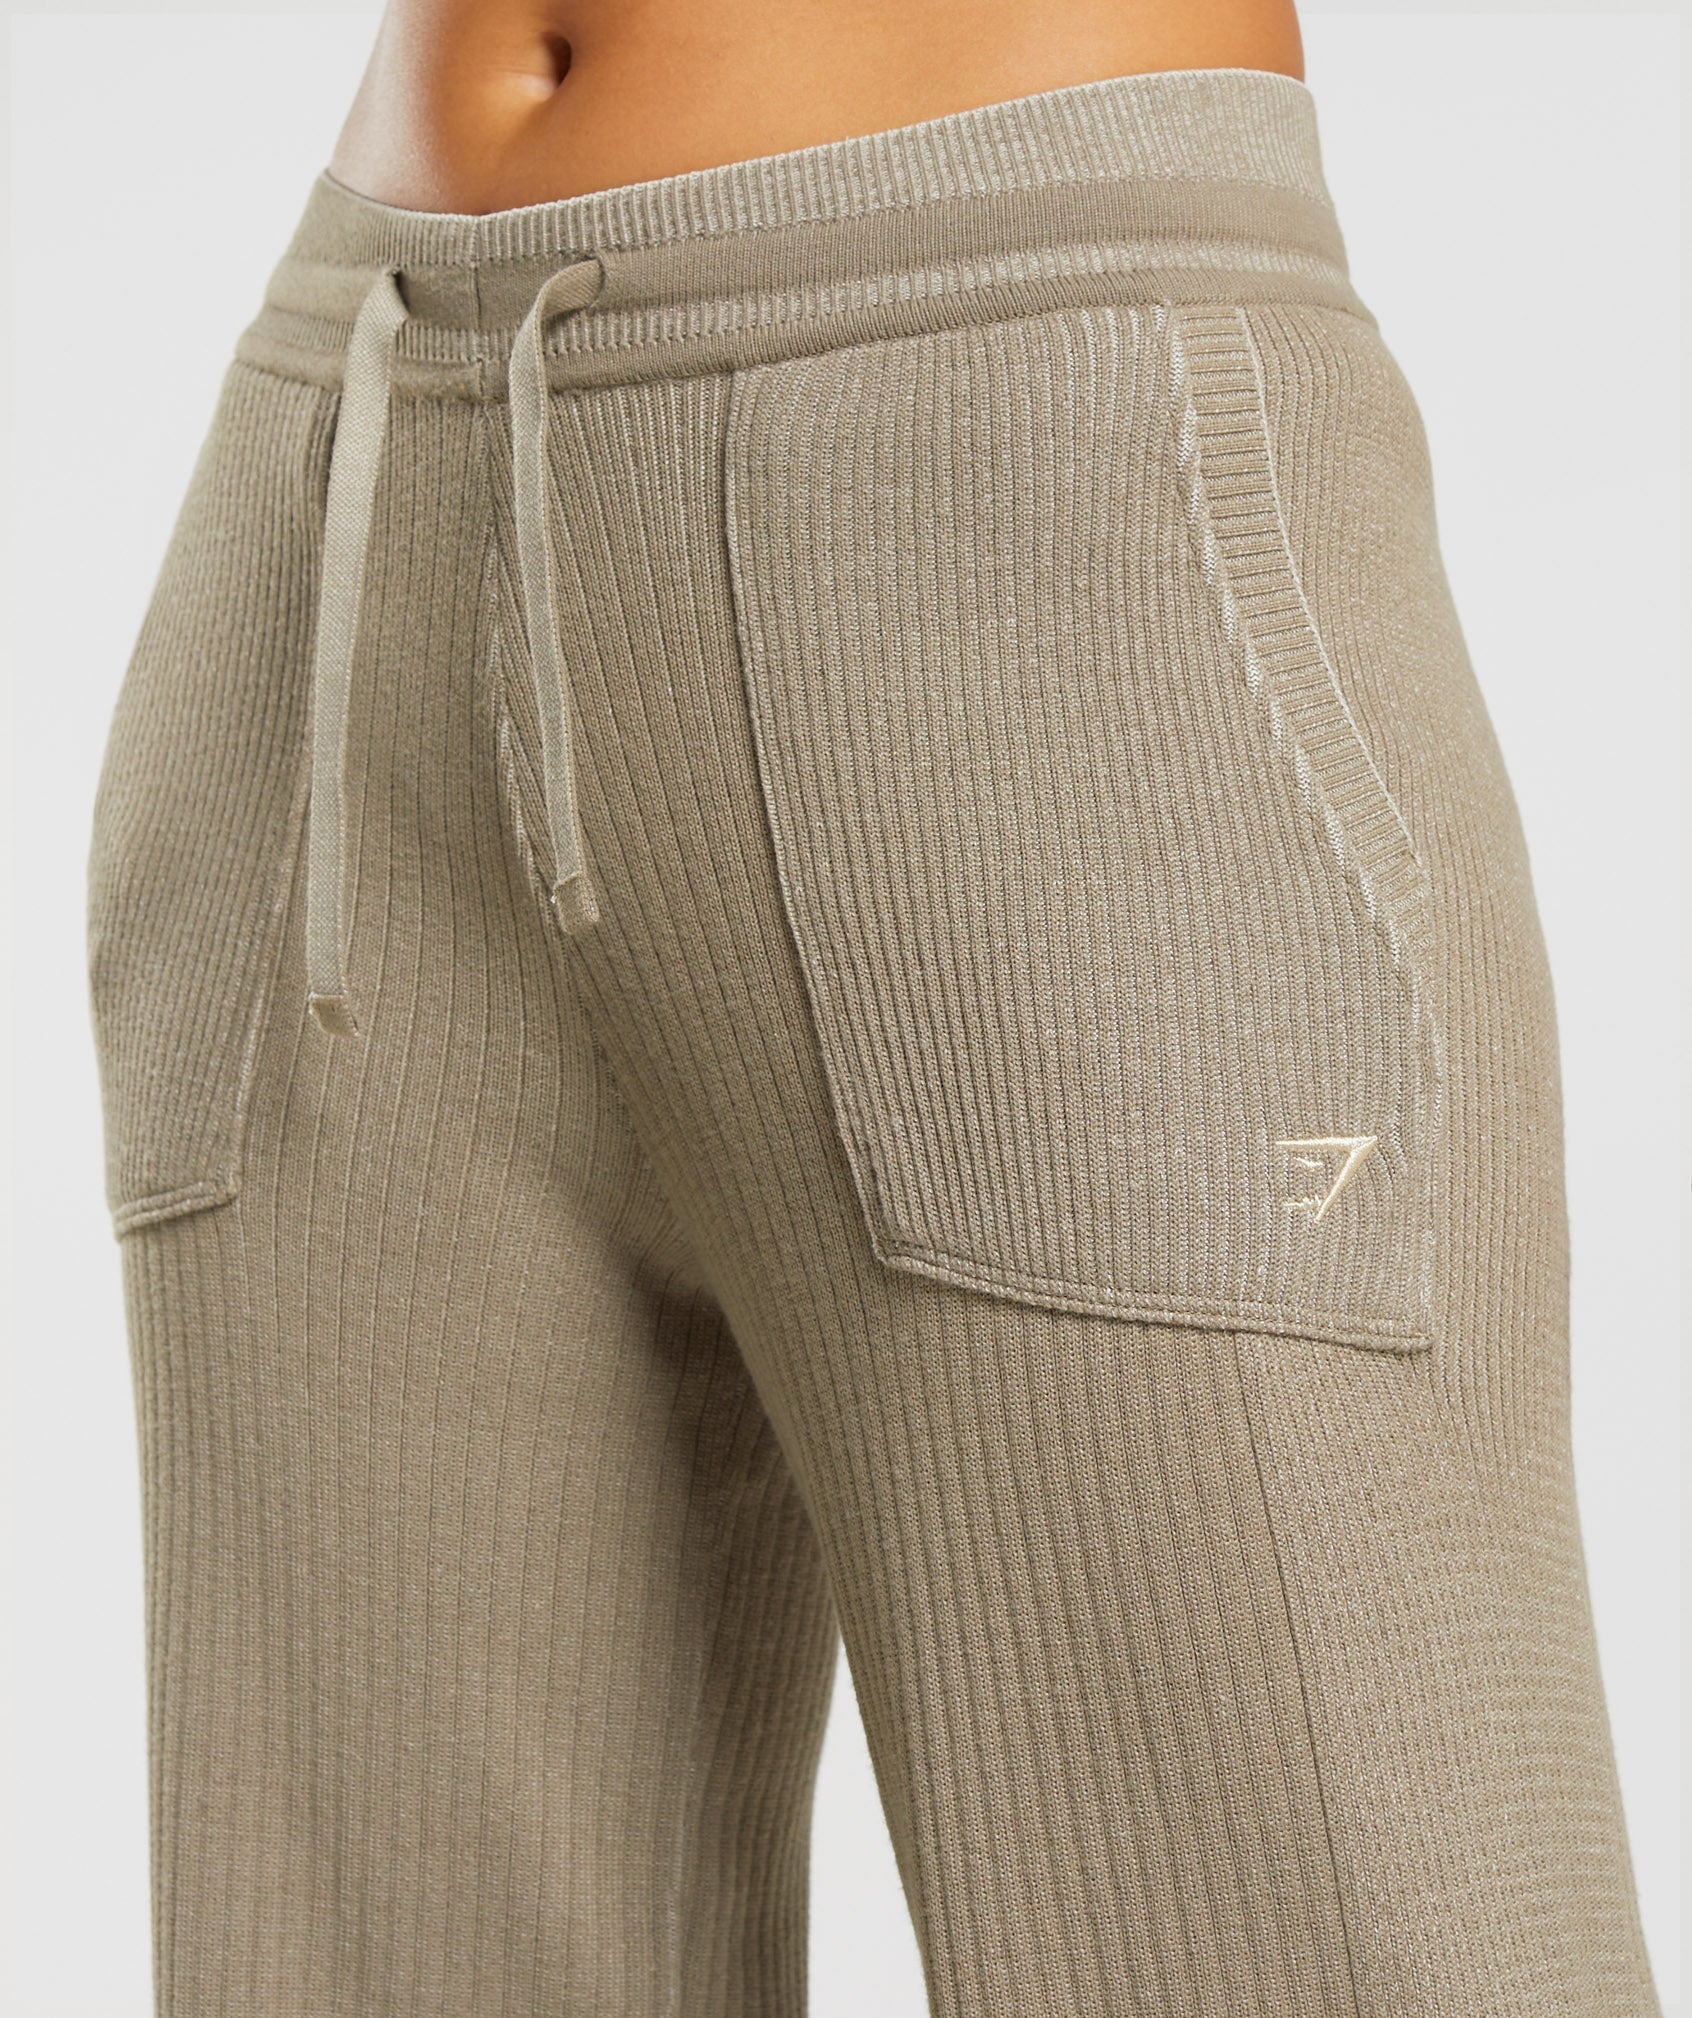 Pause Knitwear Joggers in Cement Brown/Pebble Grey